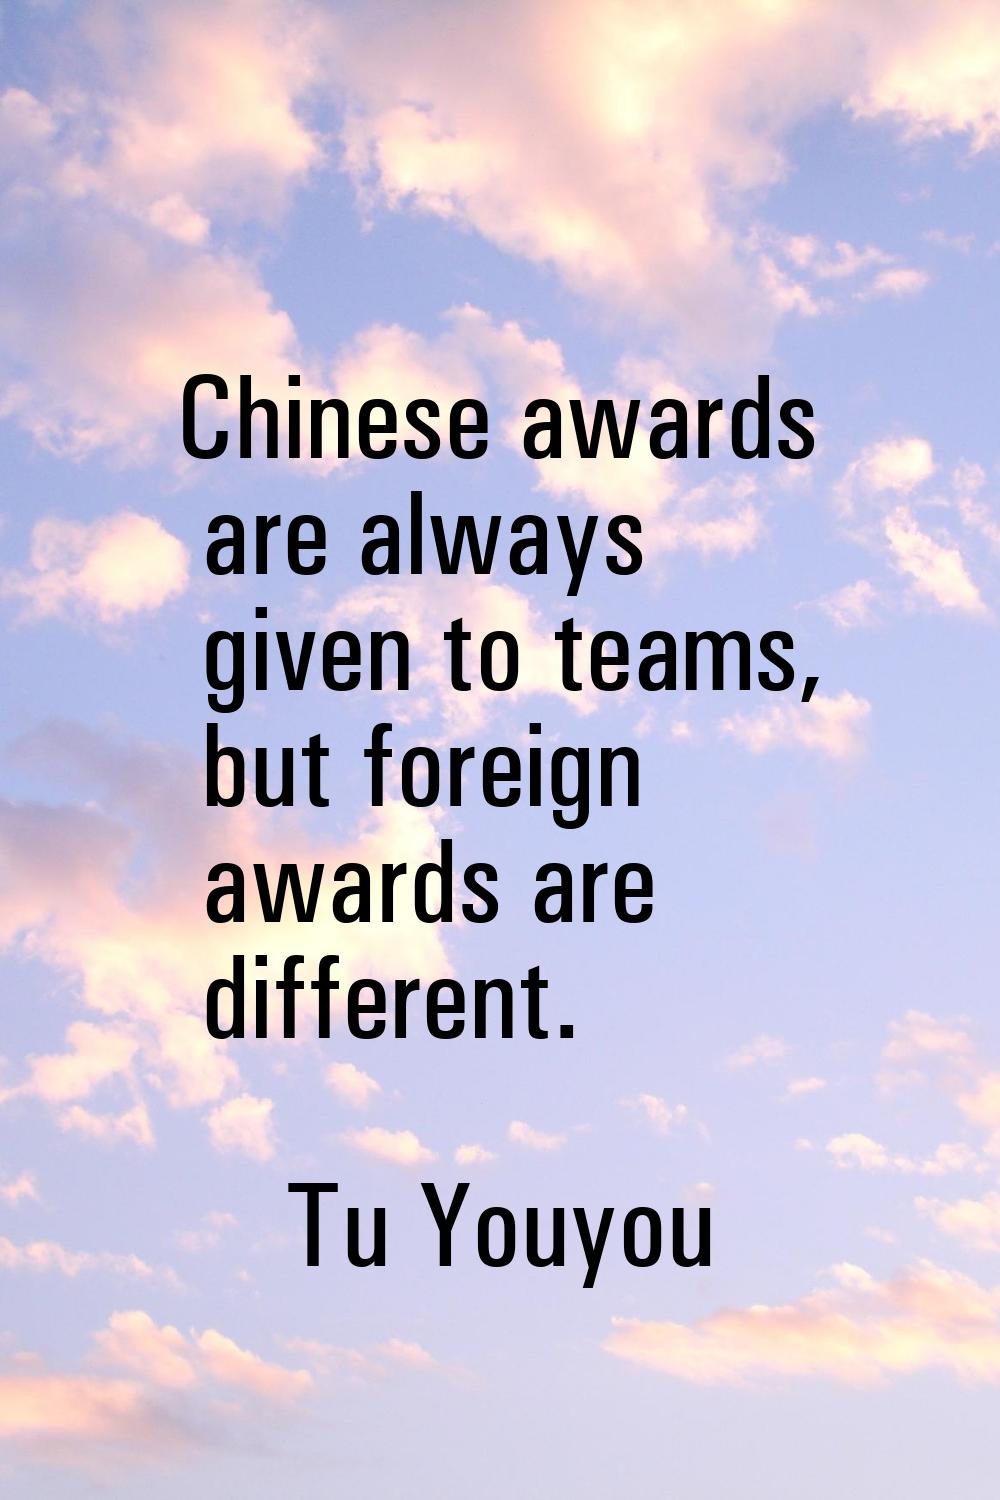 Chinese awards are always given to teams, but foreign awards are different.